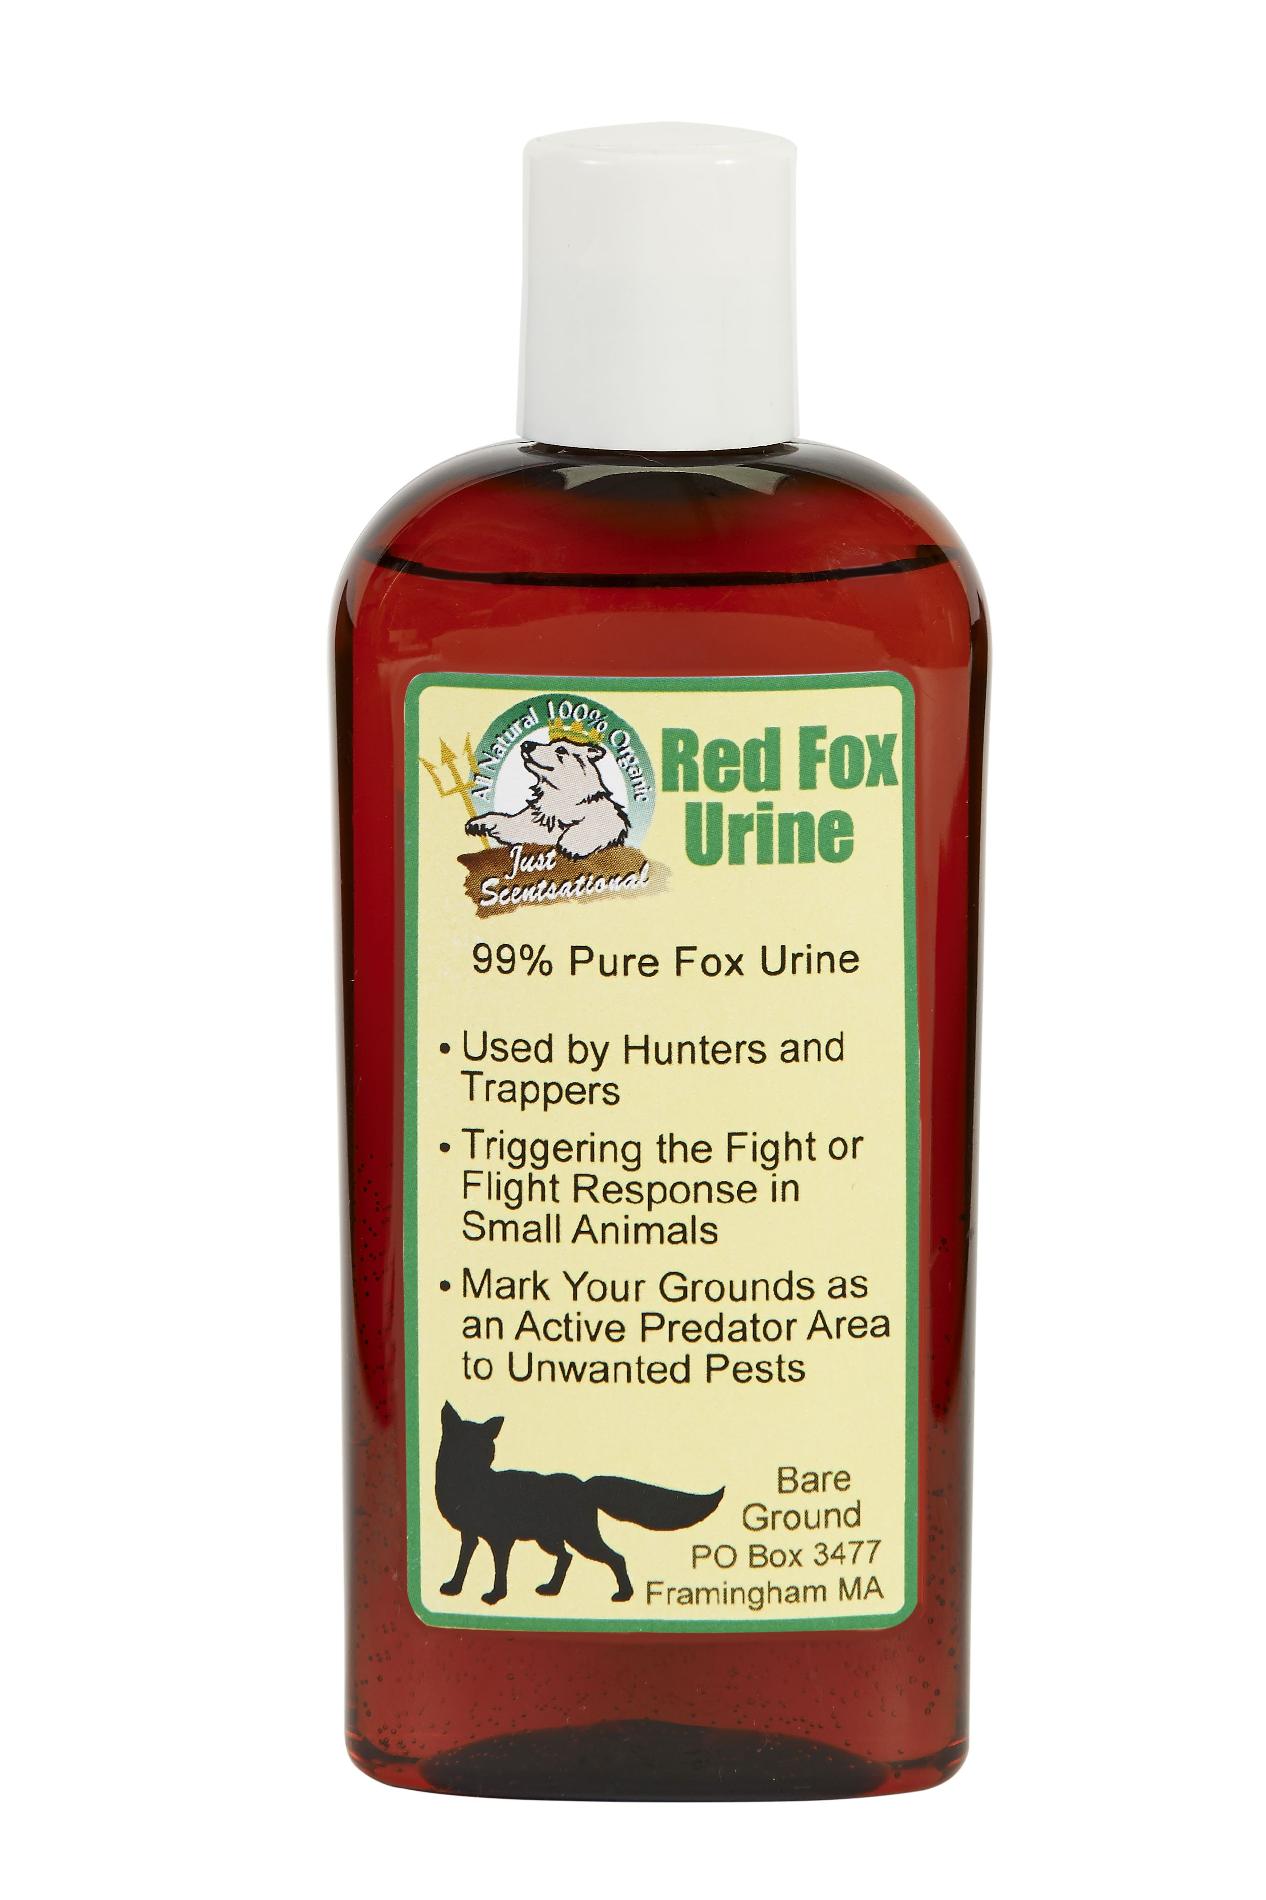 Just Scentsational 4 oz bottle of pure 100% meat fed red fox urine